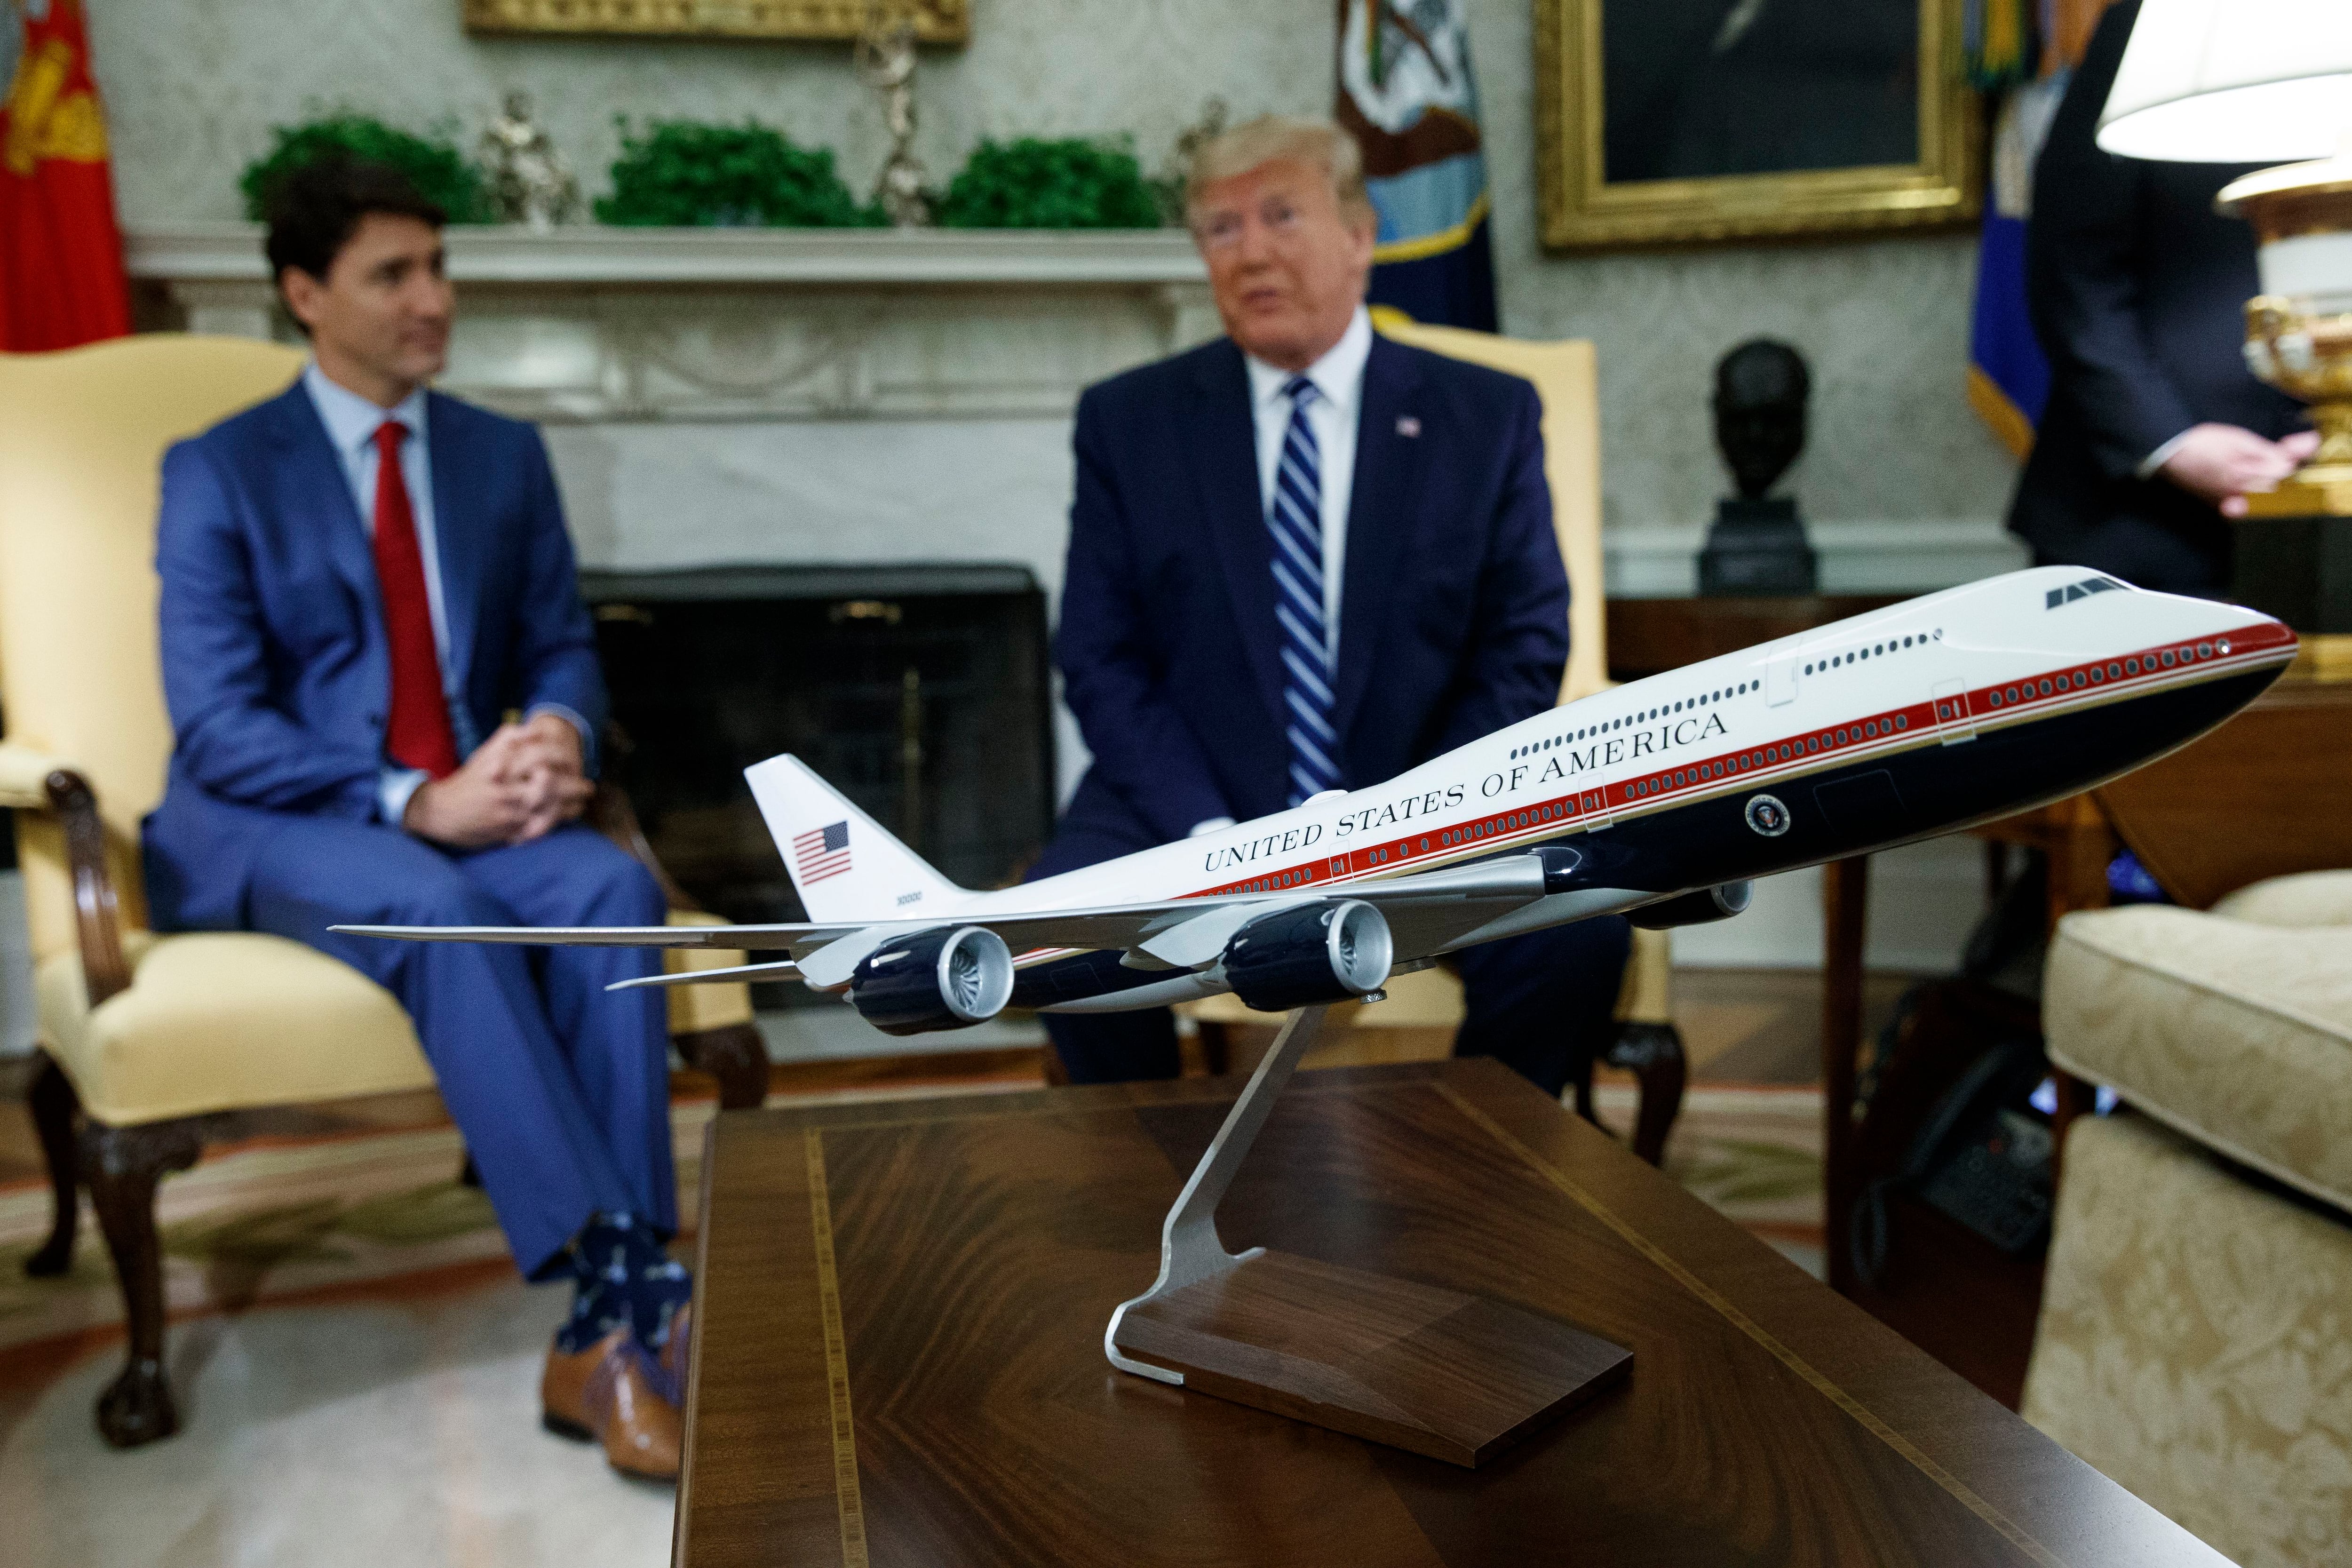 New paint design for 'Next Air Force One' > Air Force > Article Display